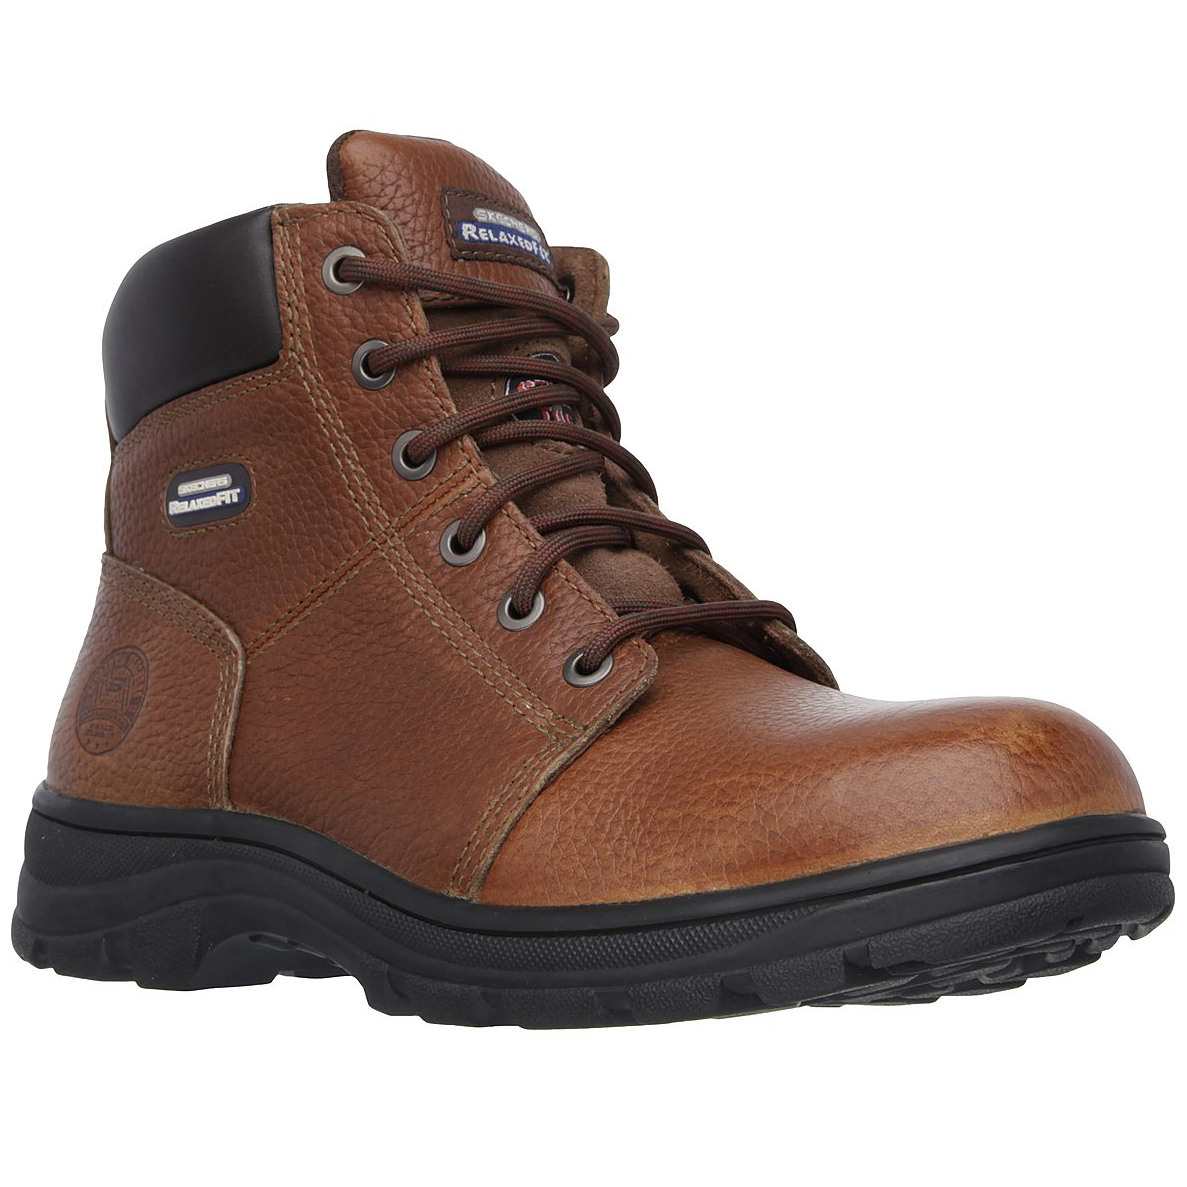 Skechers Men's 6 In. Work: Relaxed Fit - Workshire Steel Toe Work Boots - Brown, 9.5